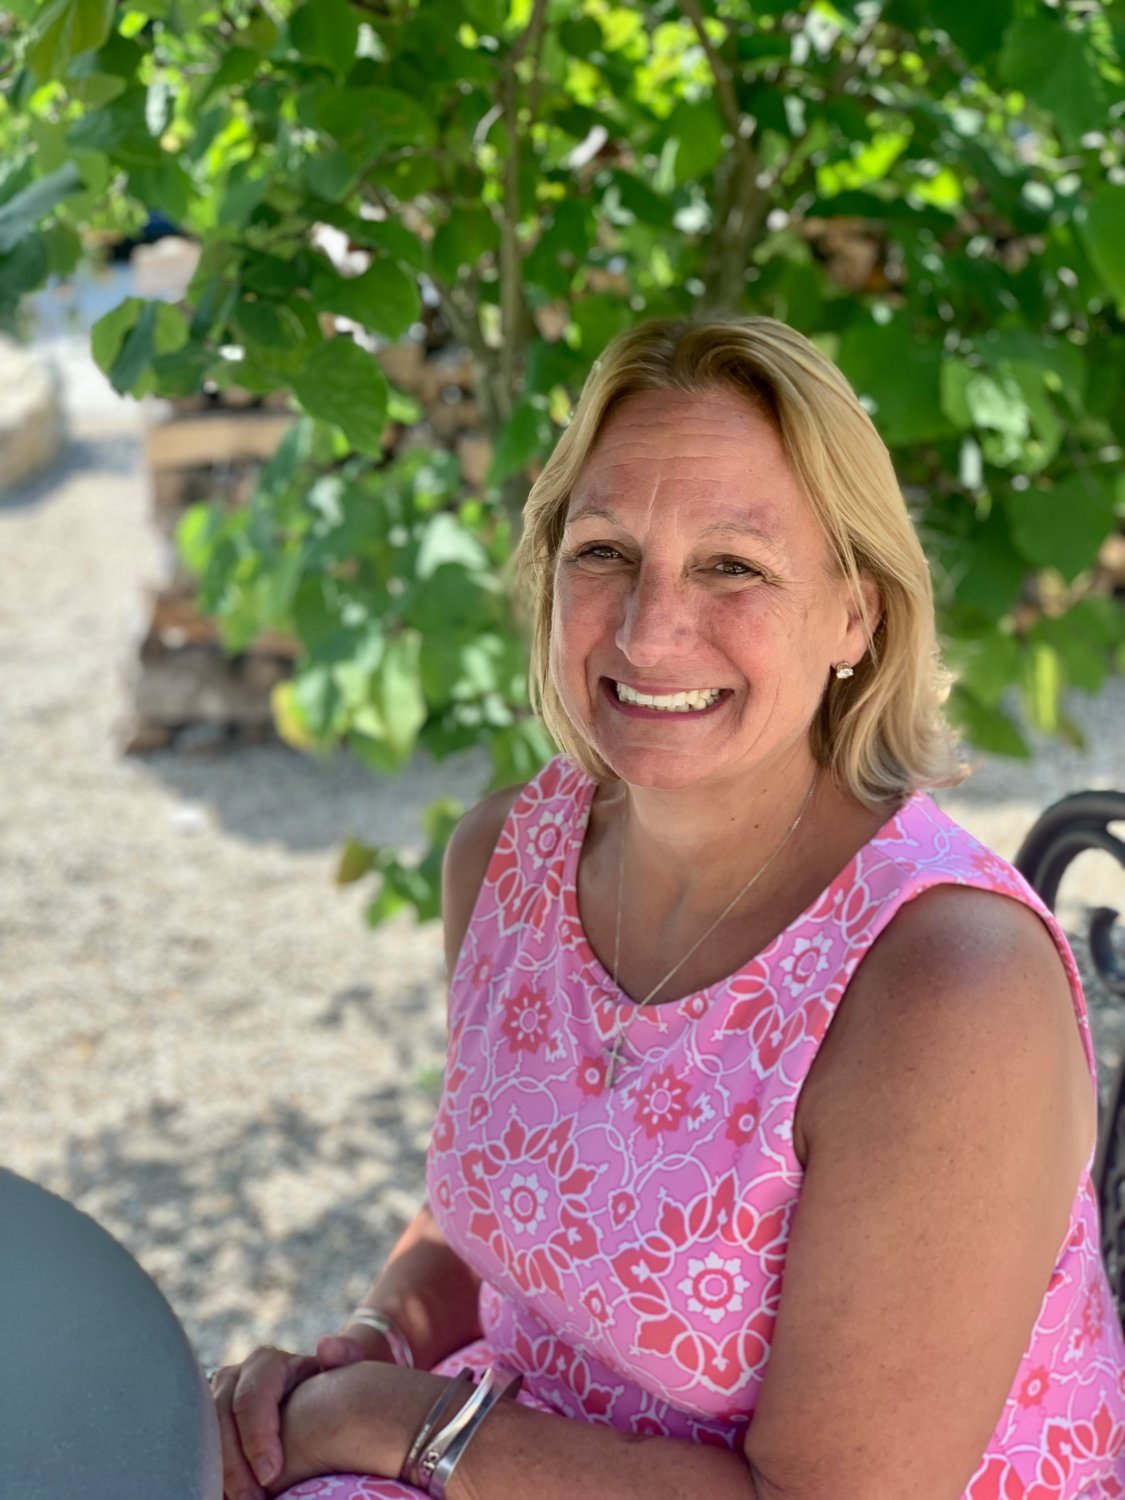 Tracey McGee-Moreira “retired” from her job in the Barrington School District to become principal of the Rhode Island Connections Academy, under the umbrella of the East Bay Educational Collaborative, based in Warren.